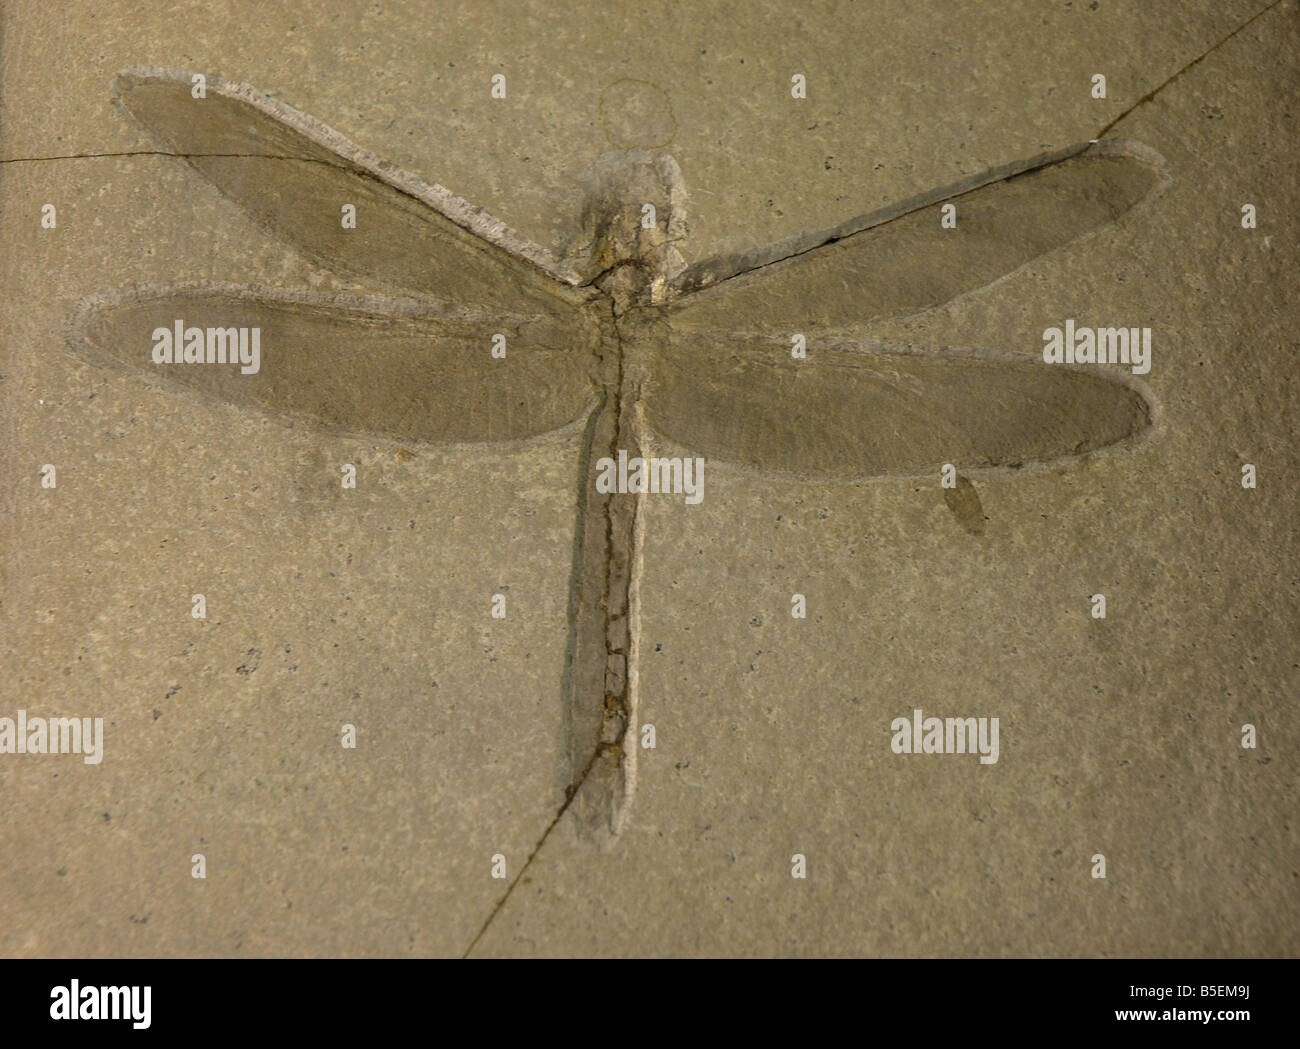 Fossil of a carboniferous age dragonfly, aeschnogomphus. Stock Photo